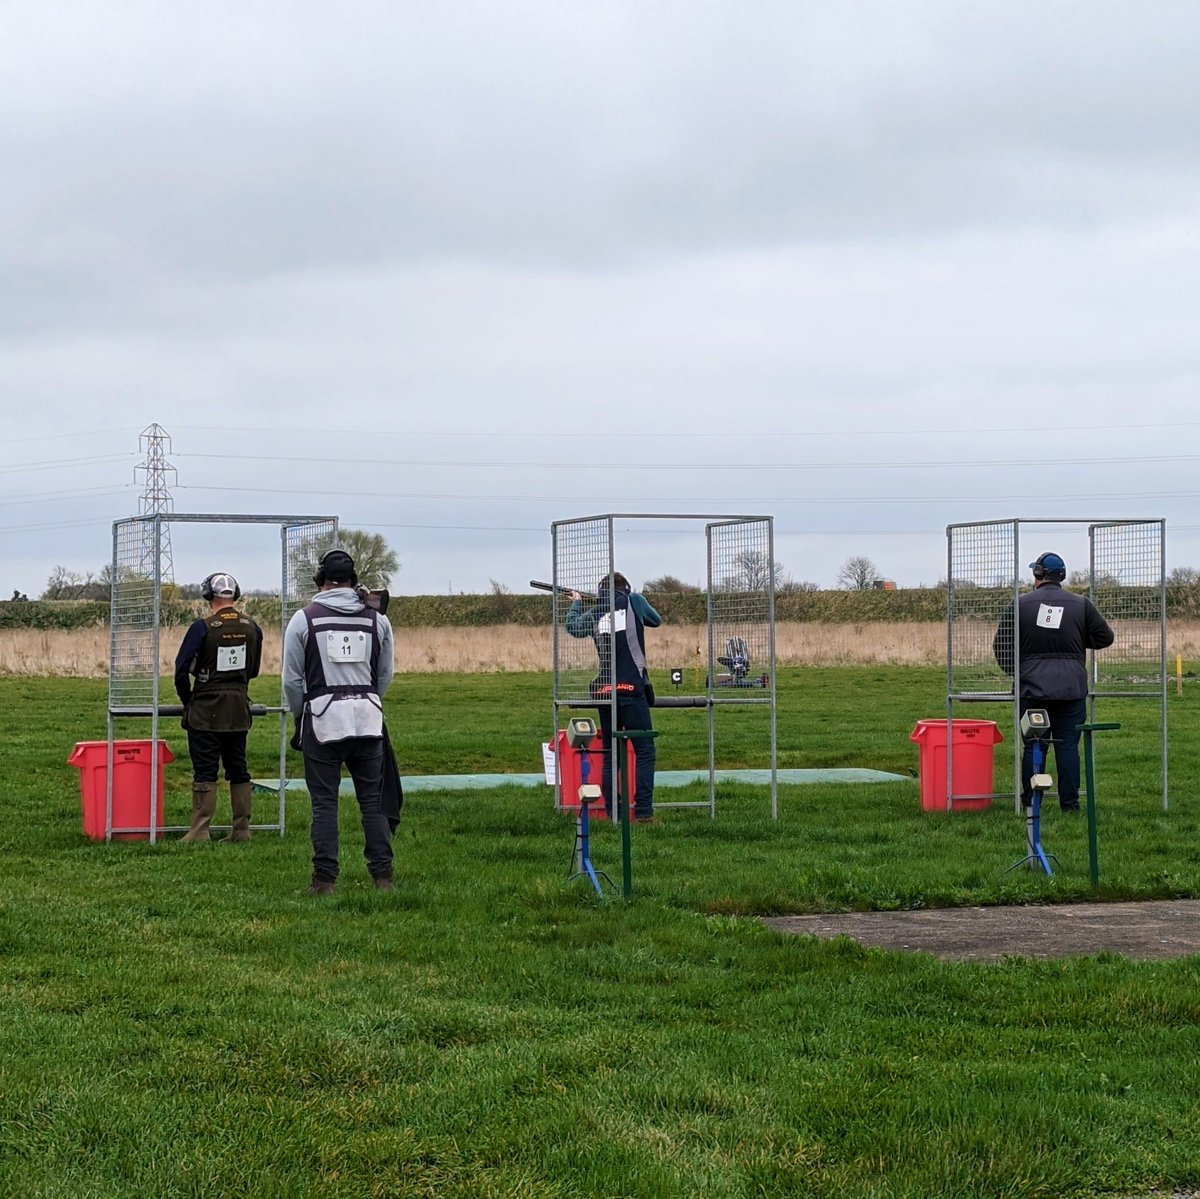 OUR MAY 100 REG COMPAK TAKES PLACE ON SATURDAY 11TH MAY

BOOK NOW: ow.ly/mLOg50R2n9X

🥏 £150 SPONSORED HIGH GUN
🥏 Birds Only – £51, Competition – £56
🥏 CAFE OPEN 

#compak #clayshooting #claytargets #shotgunsports #registeredcompetition #orstonshootingground